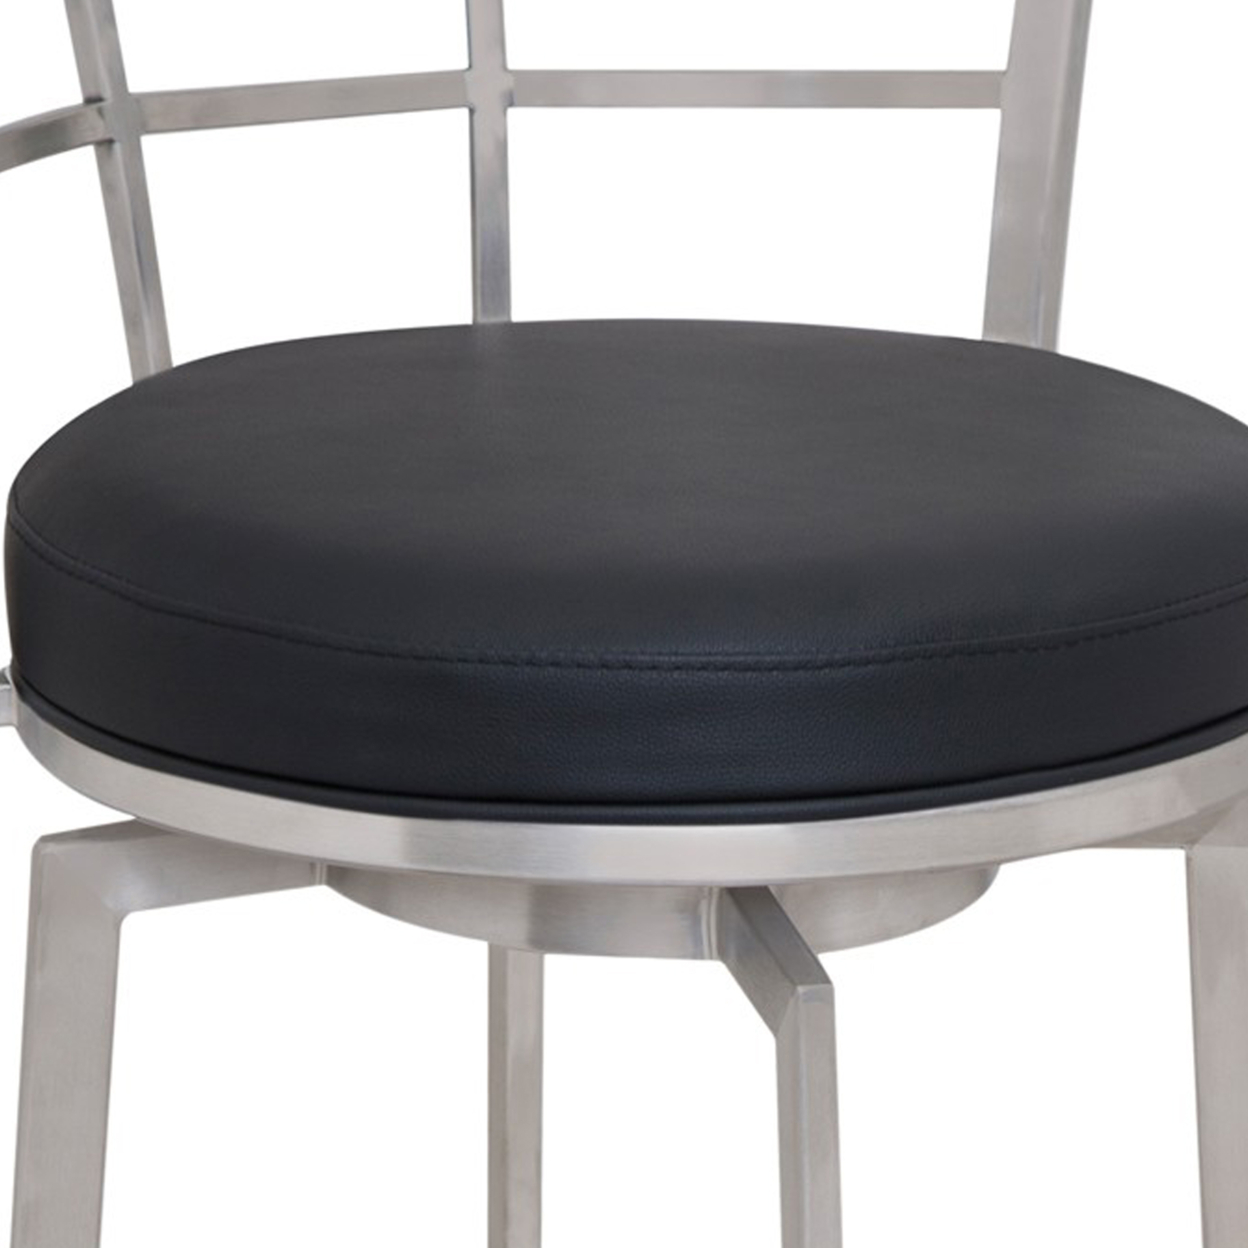 30 Inch Counter Height Barstool With Leatherette Seat, Silver And Black- Saltoro Sherpi